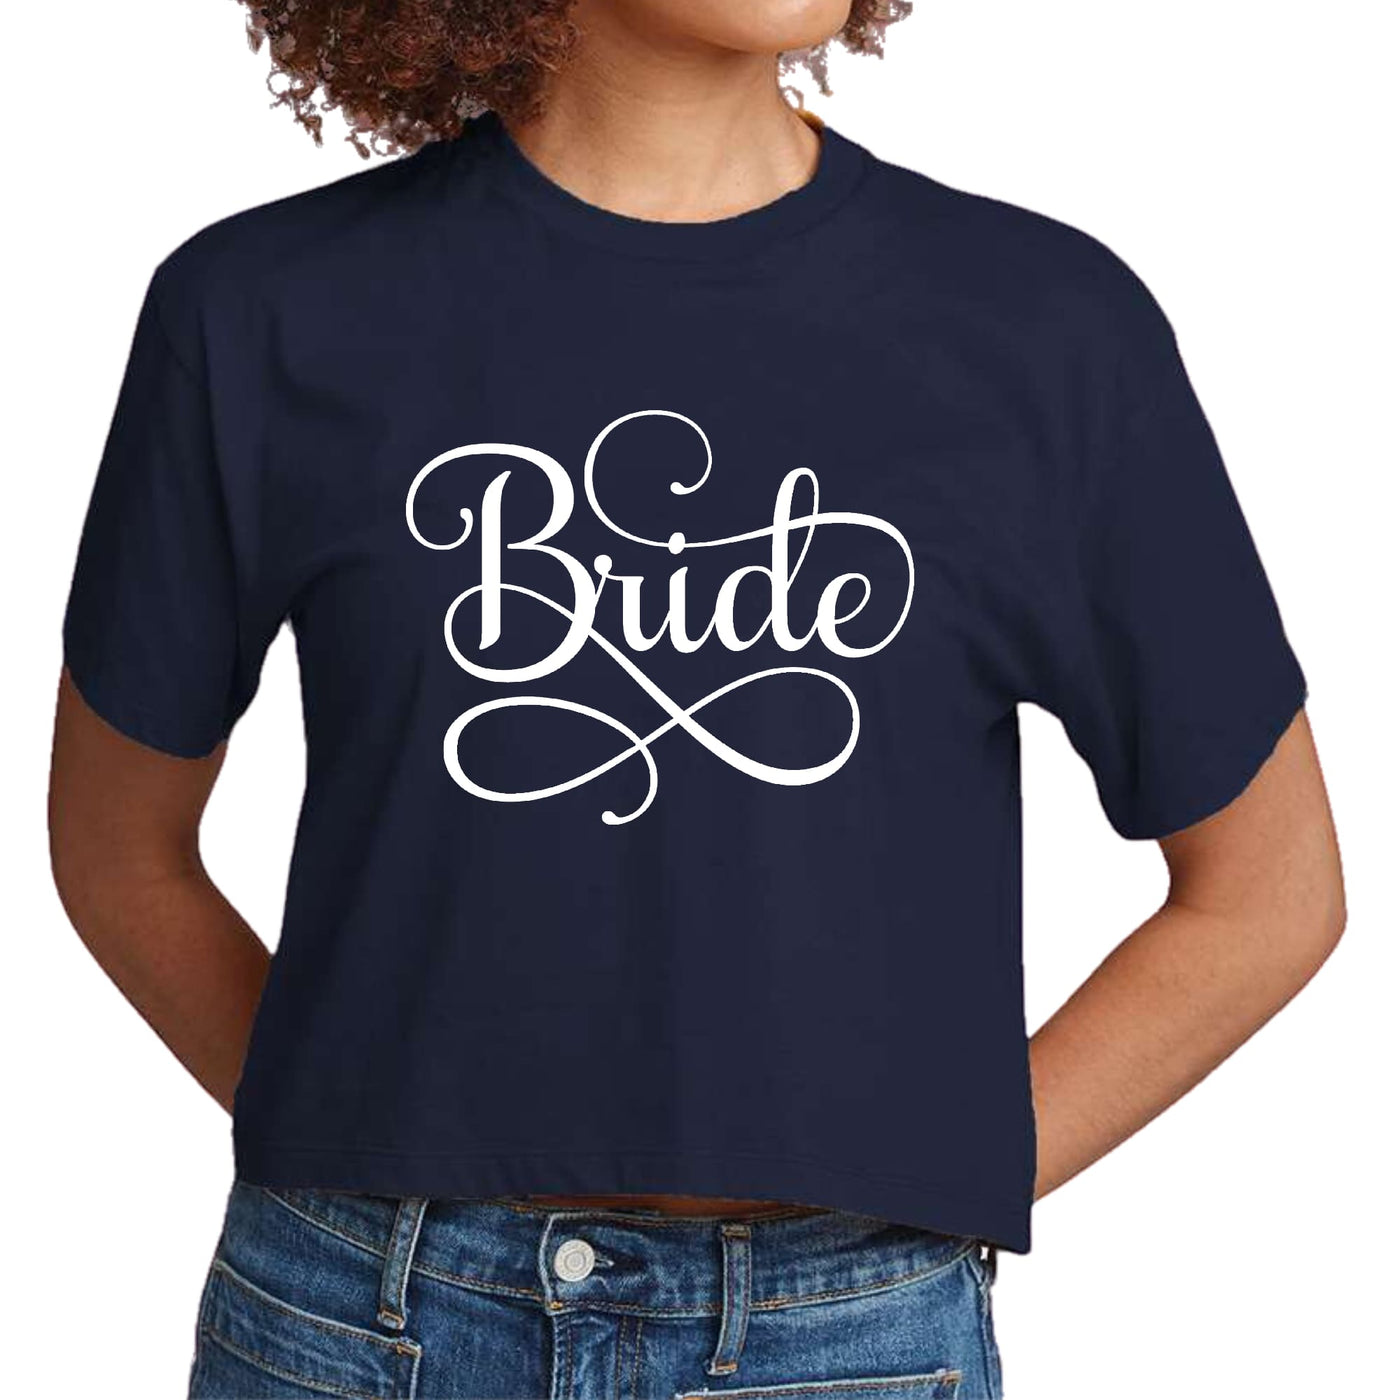 Womens Cropped Graphic T-shirt Bride Accessories Wedding - Womens | T-Shirts